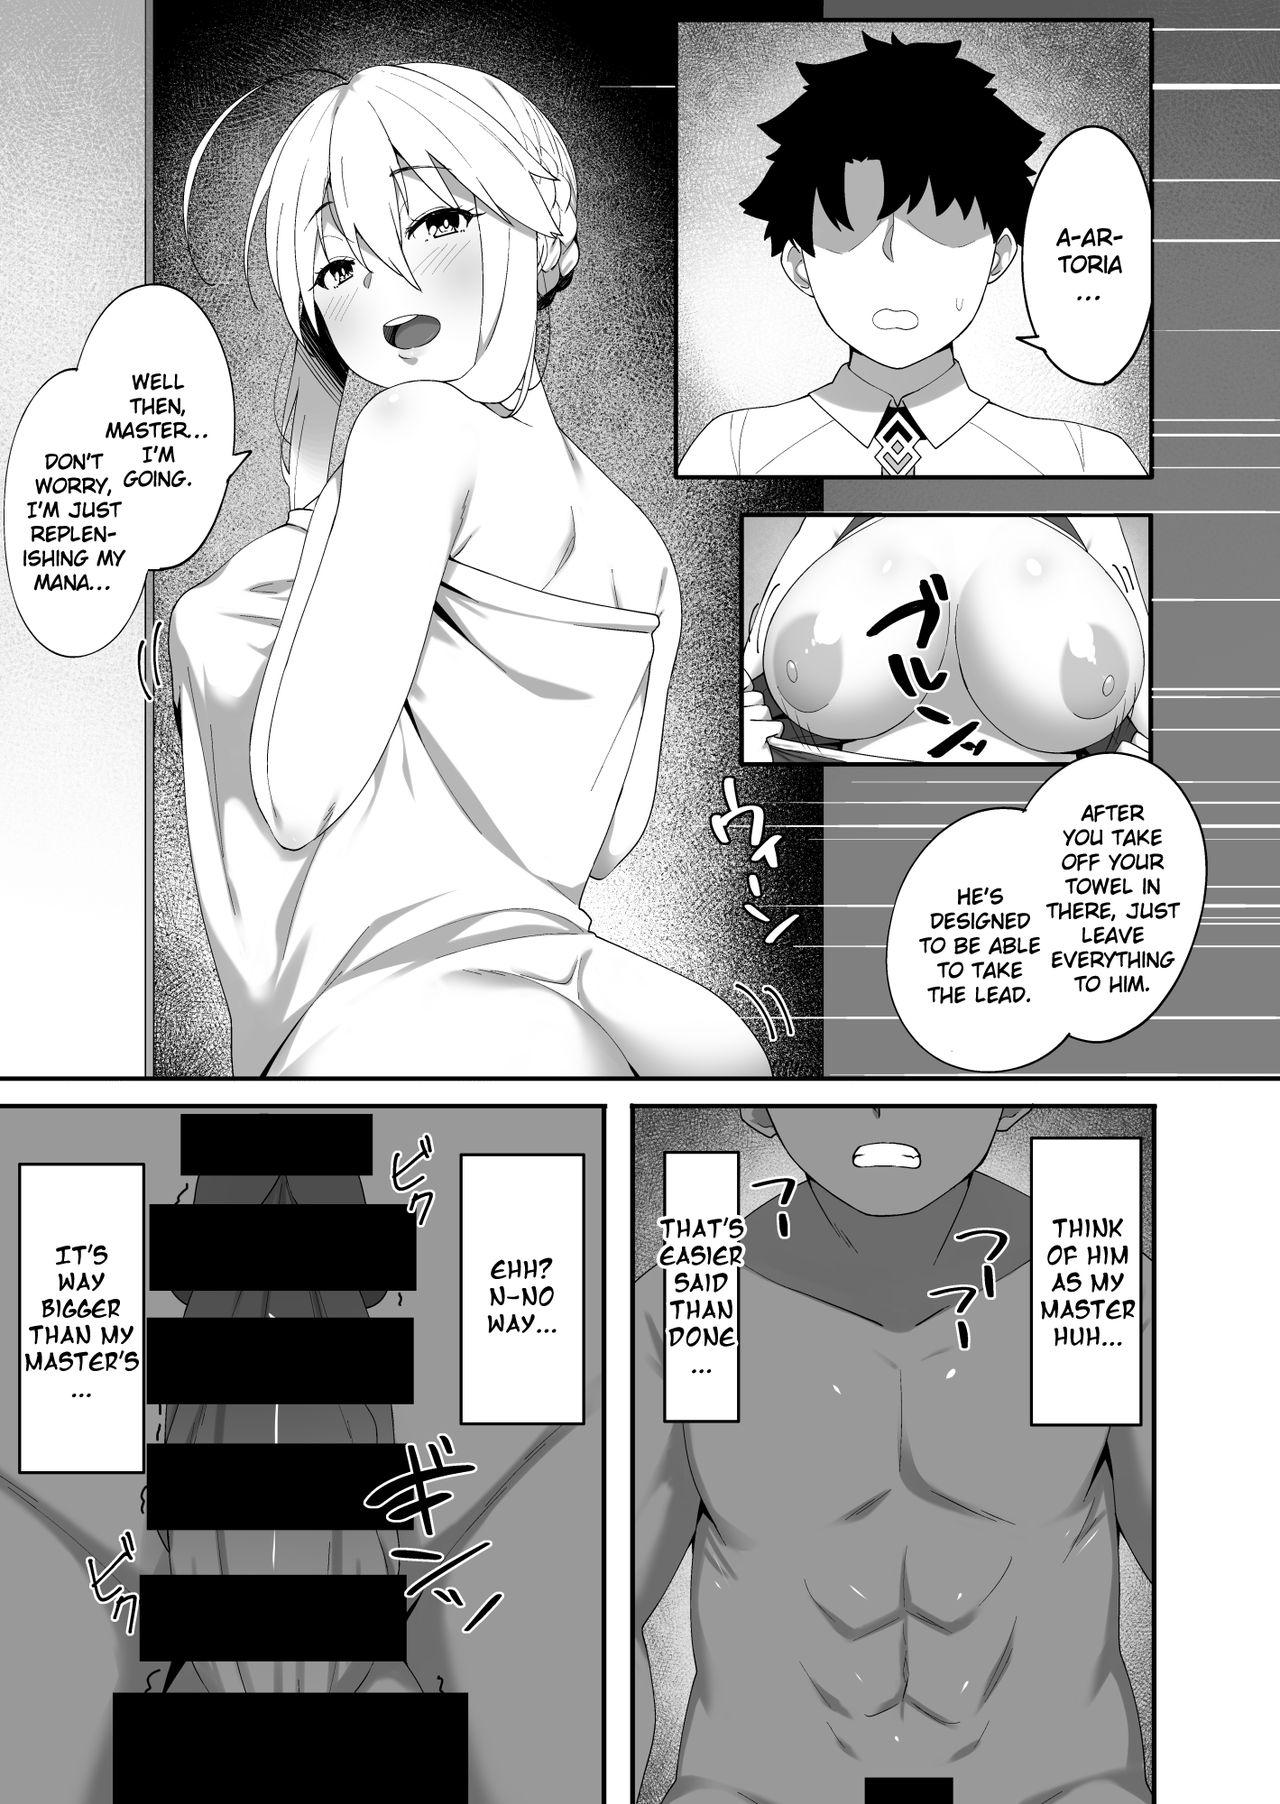  Kabe no Mukou de Kimi ga Naku 2 | Crying Out From The Other Side Of The Wall 2 - Fate grand order Pussysex - Page 4